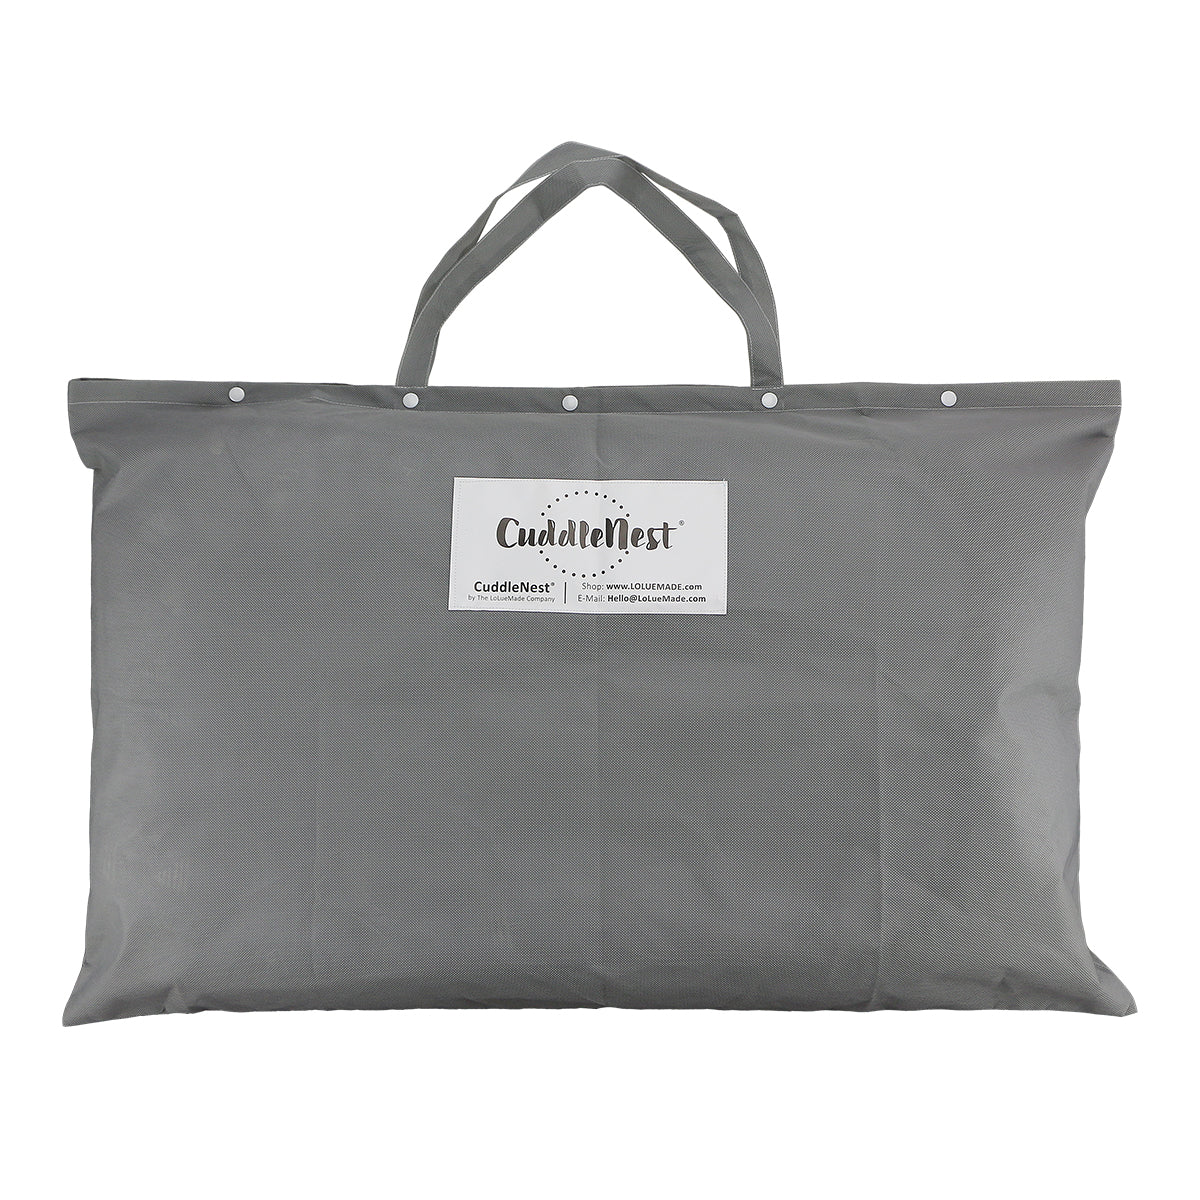 CuddleNest® Mighty: Spare Dust Cover - The LoLueMade Company®